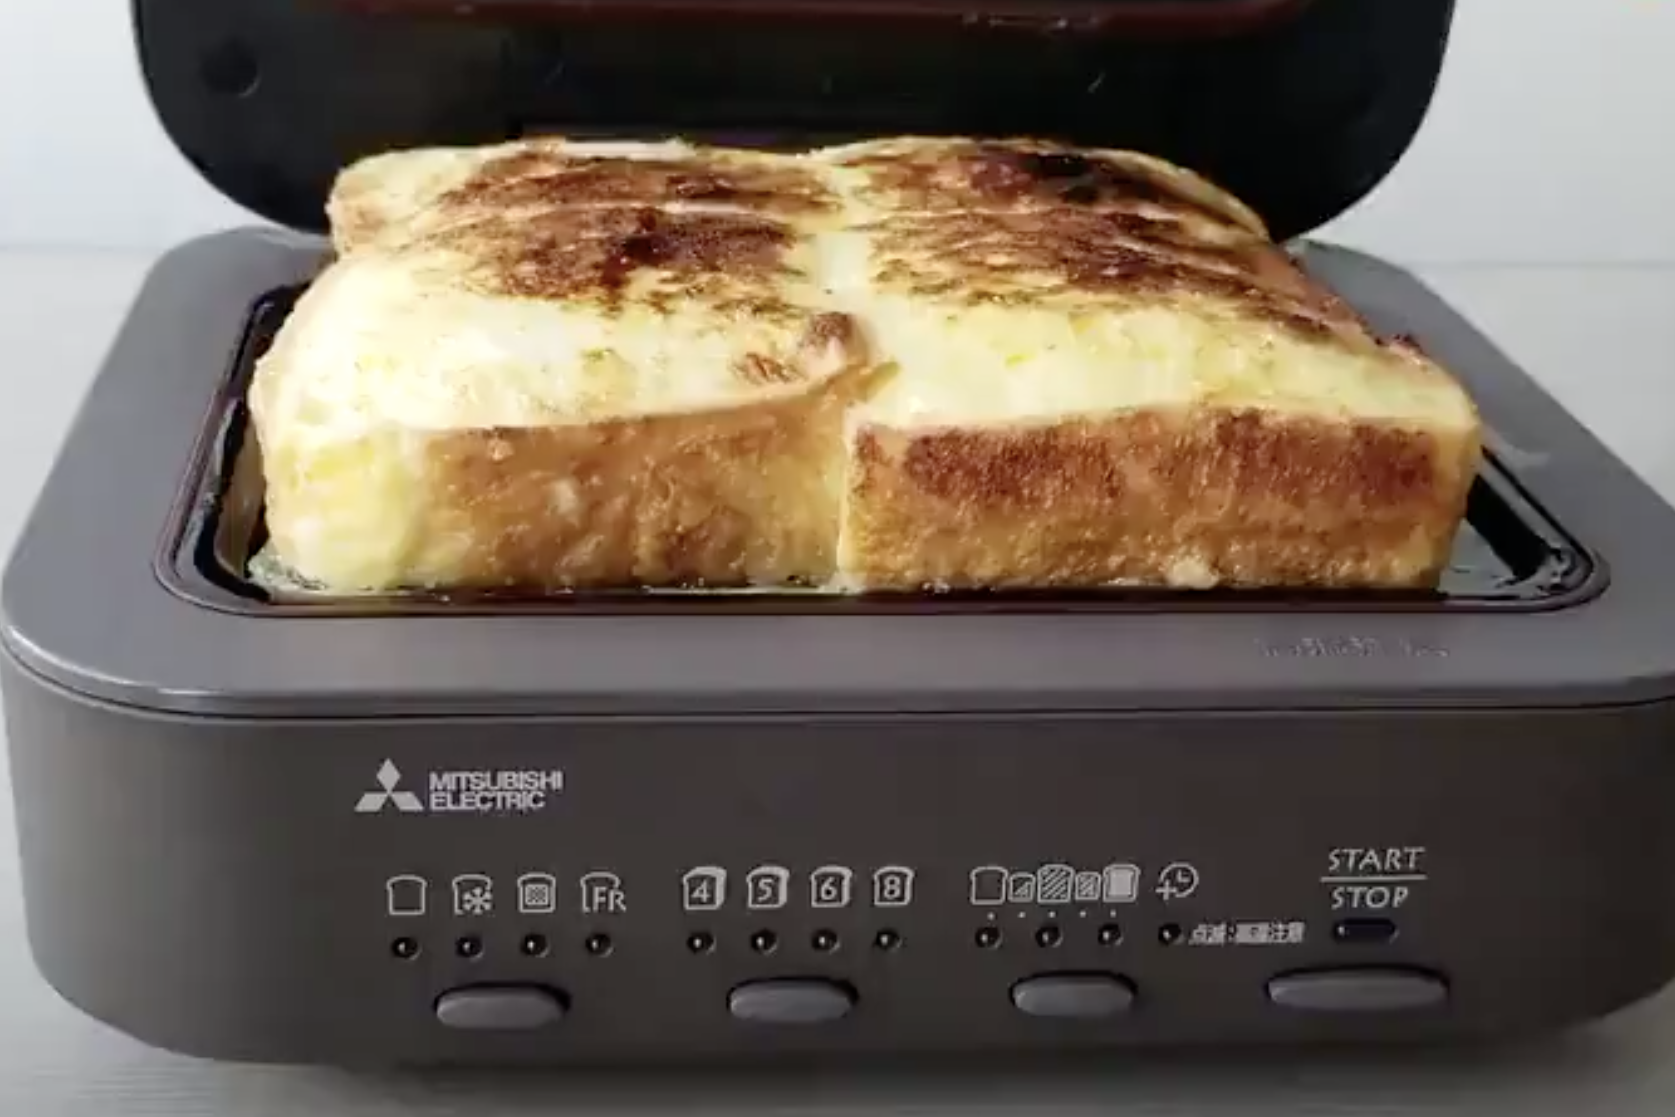 Toaster bakes bread while humidifying it - Japan Today